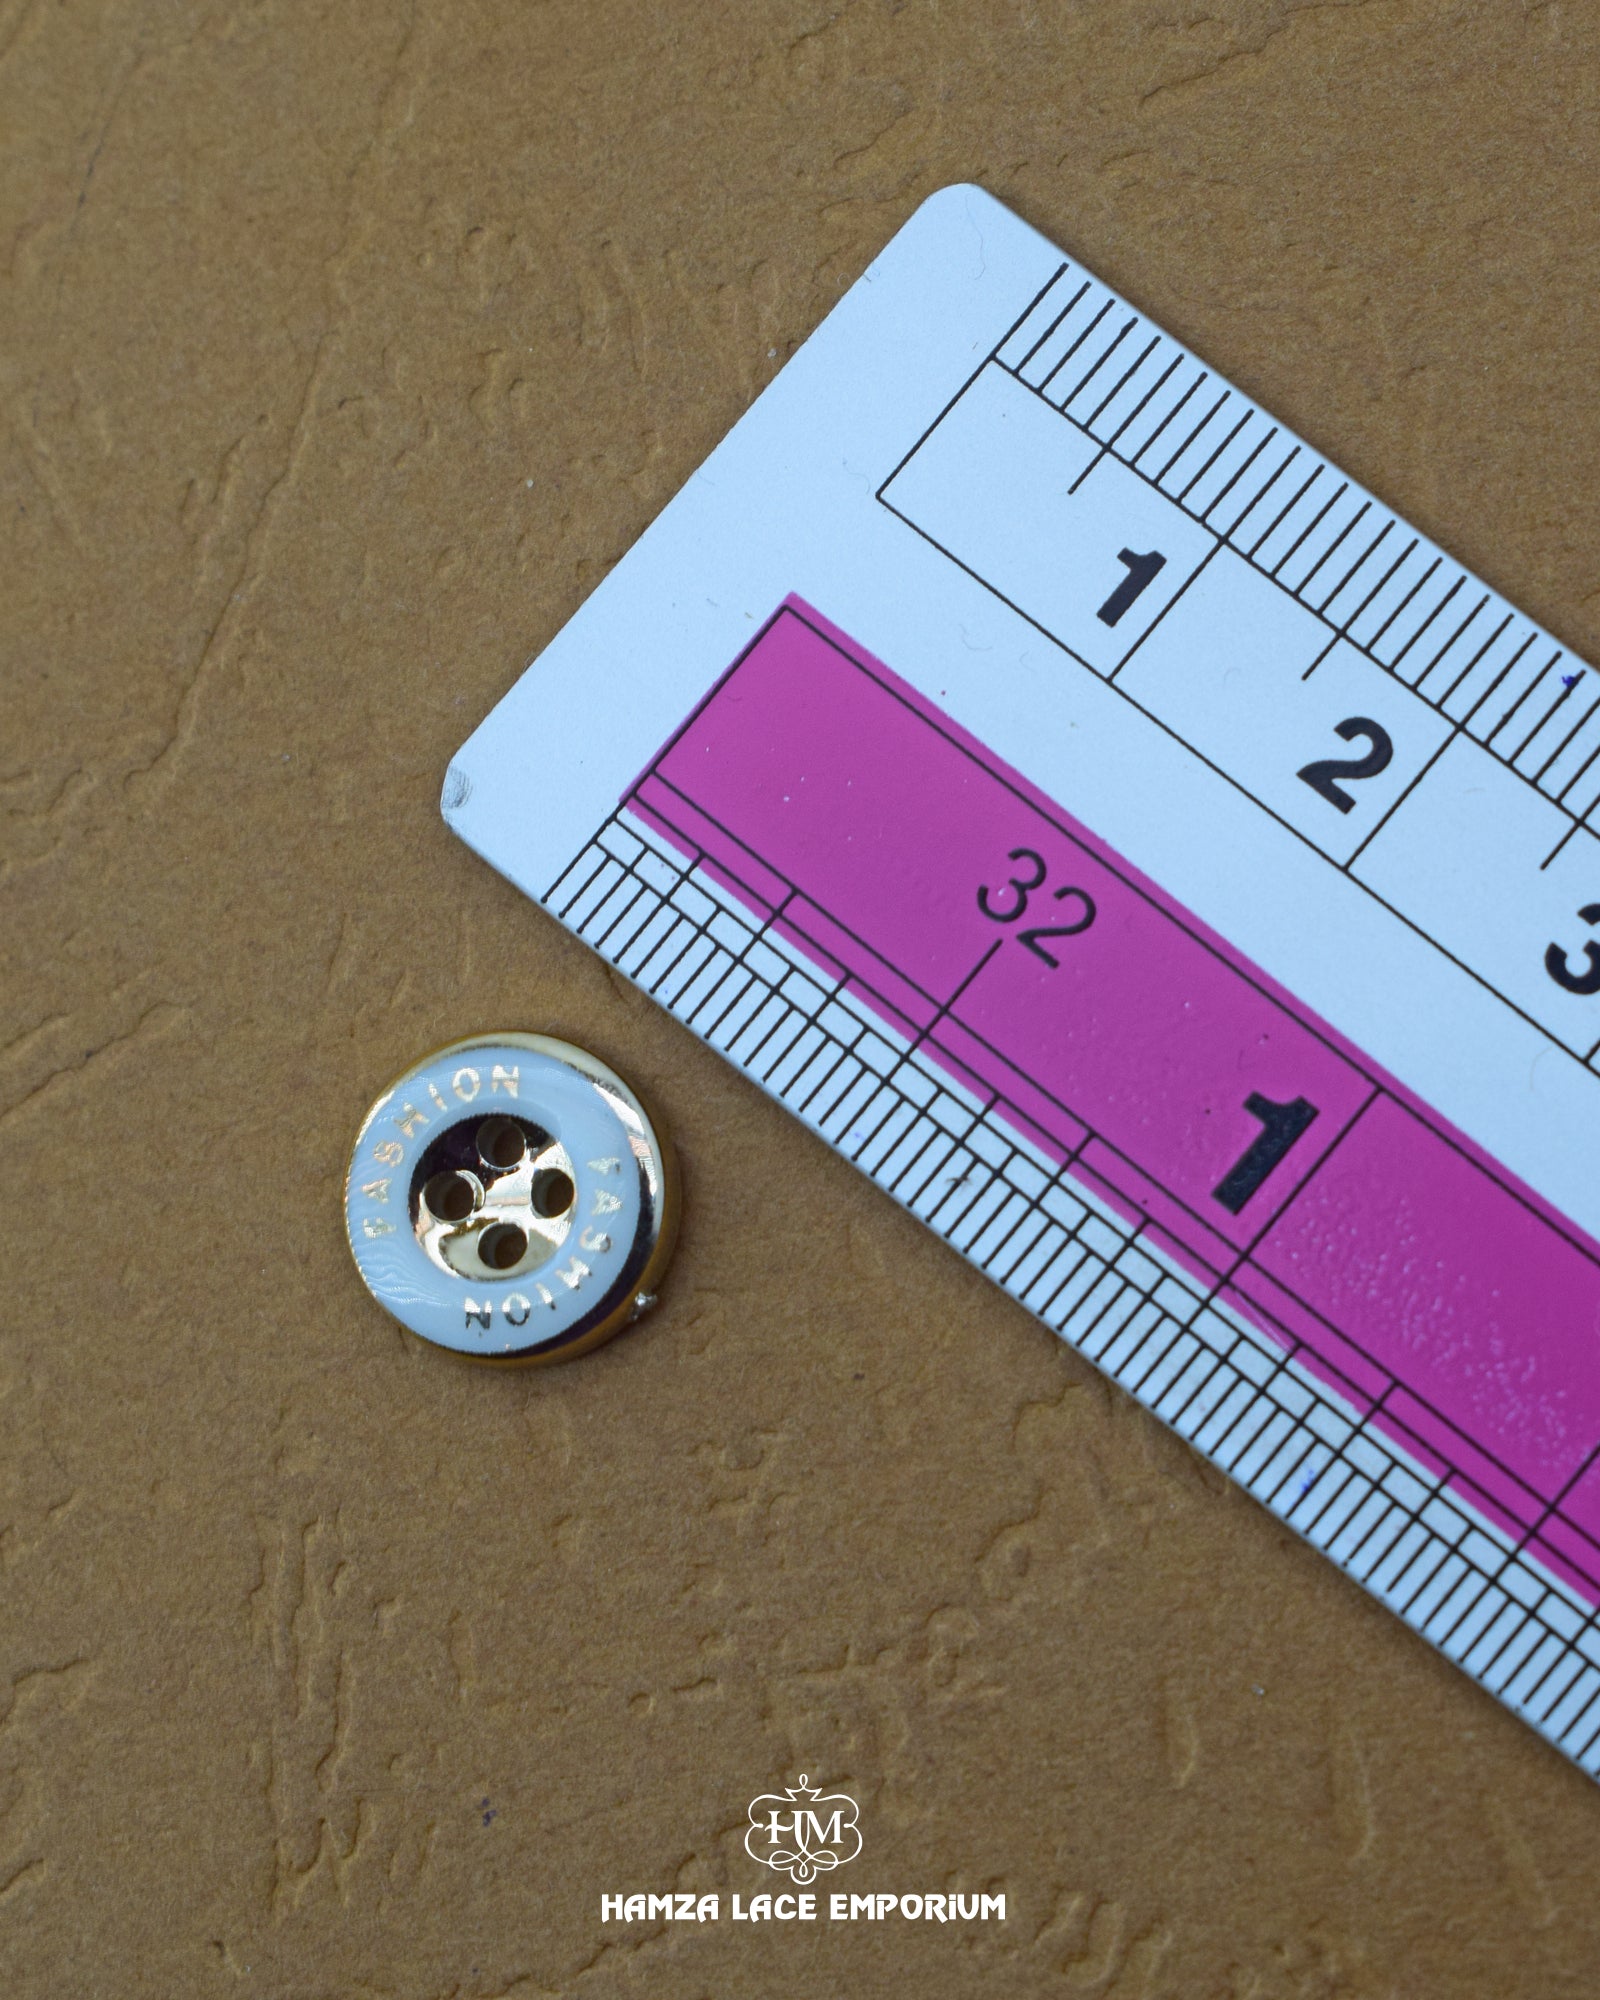 The dimensions of the 'Four Hole Plastic Button MB828' are determined using a ruler.